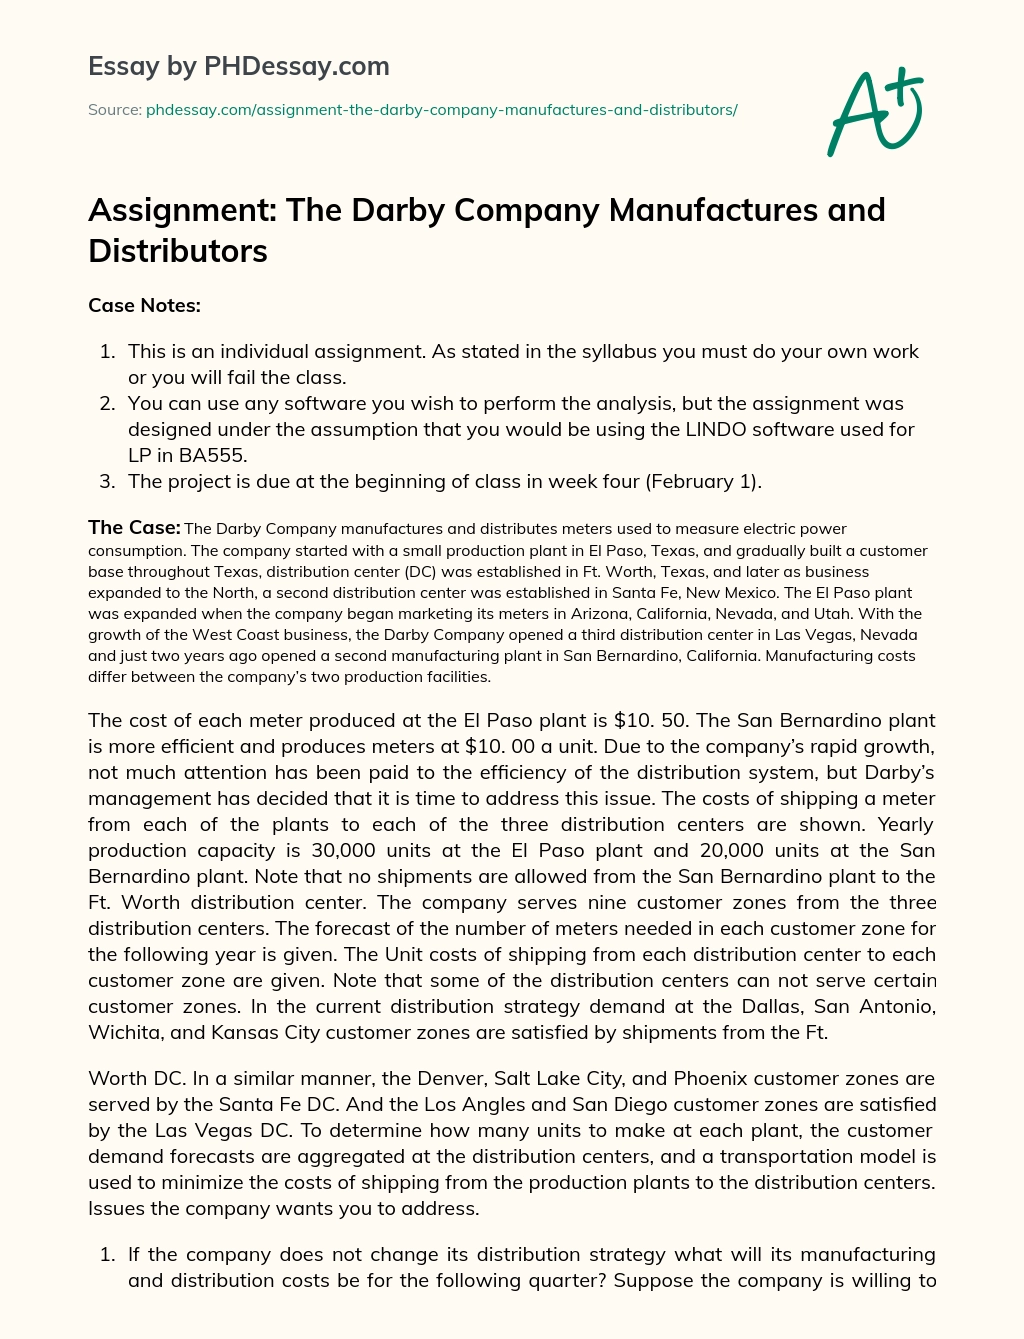 Assignment: The Darby Company Manufactures and Distributors essay